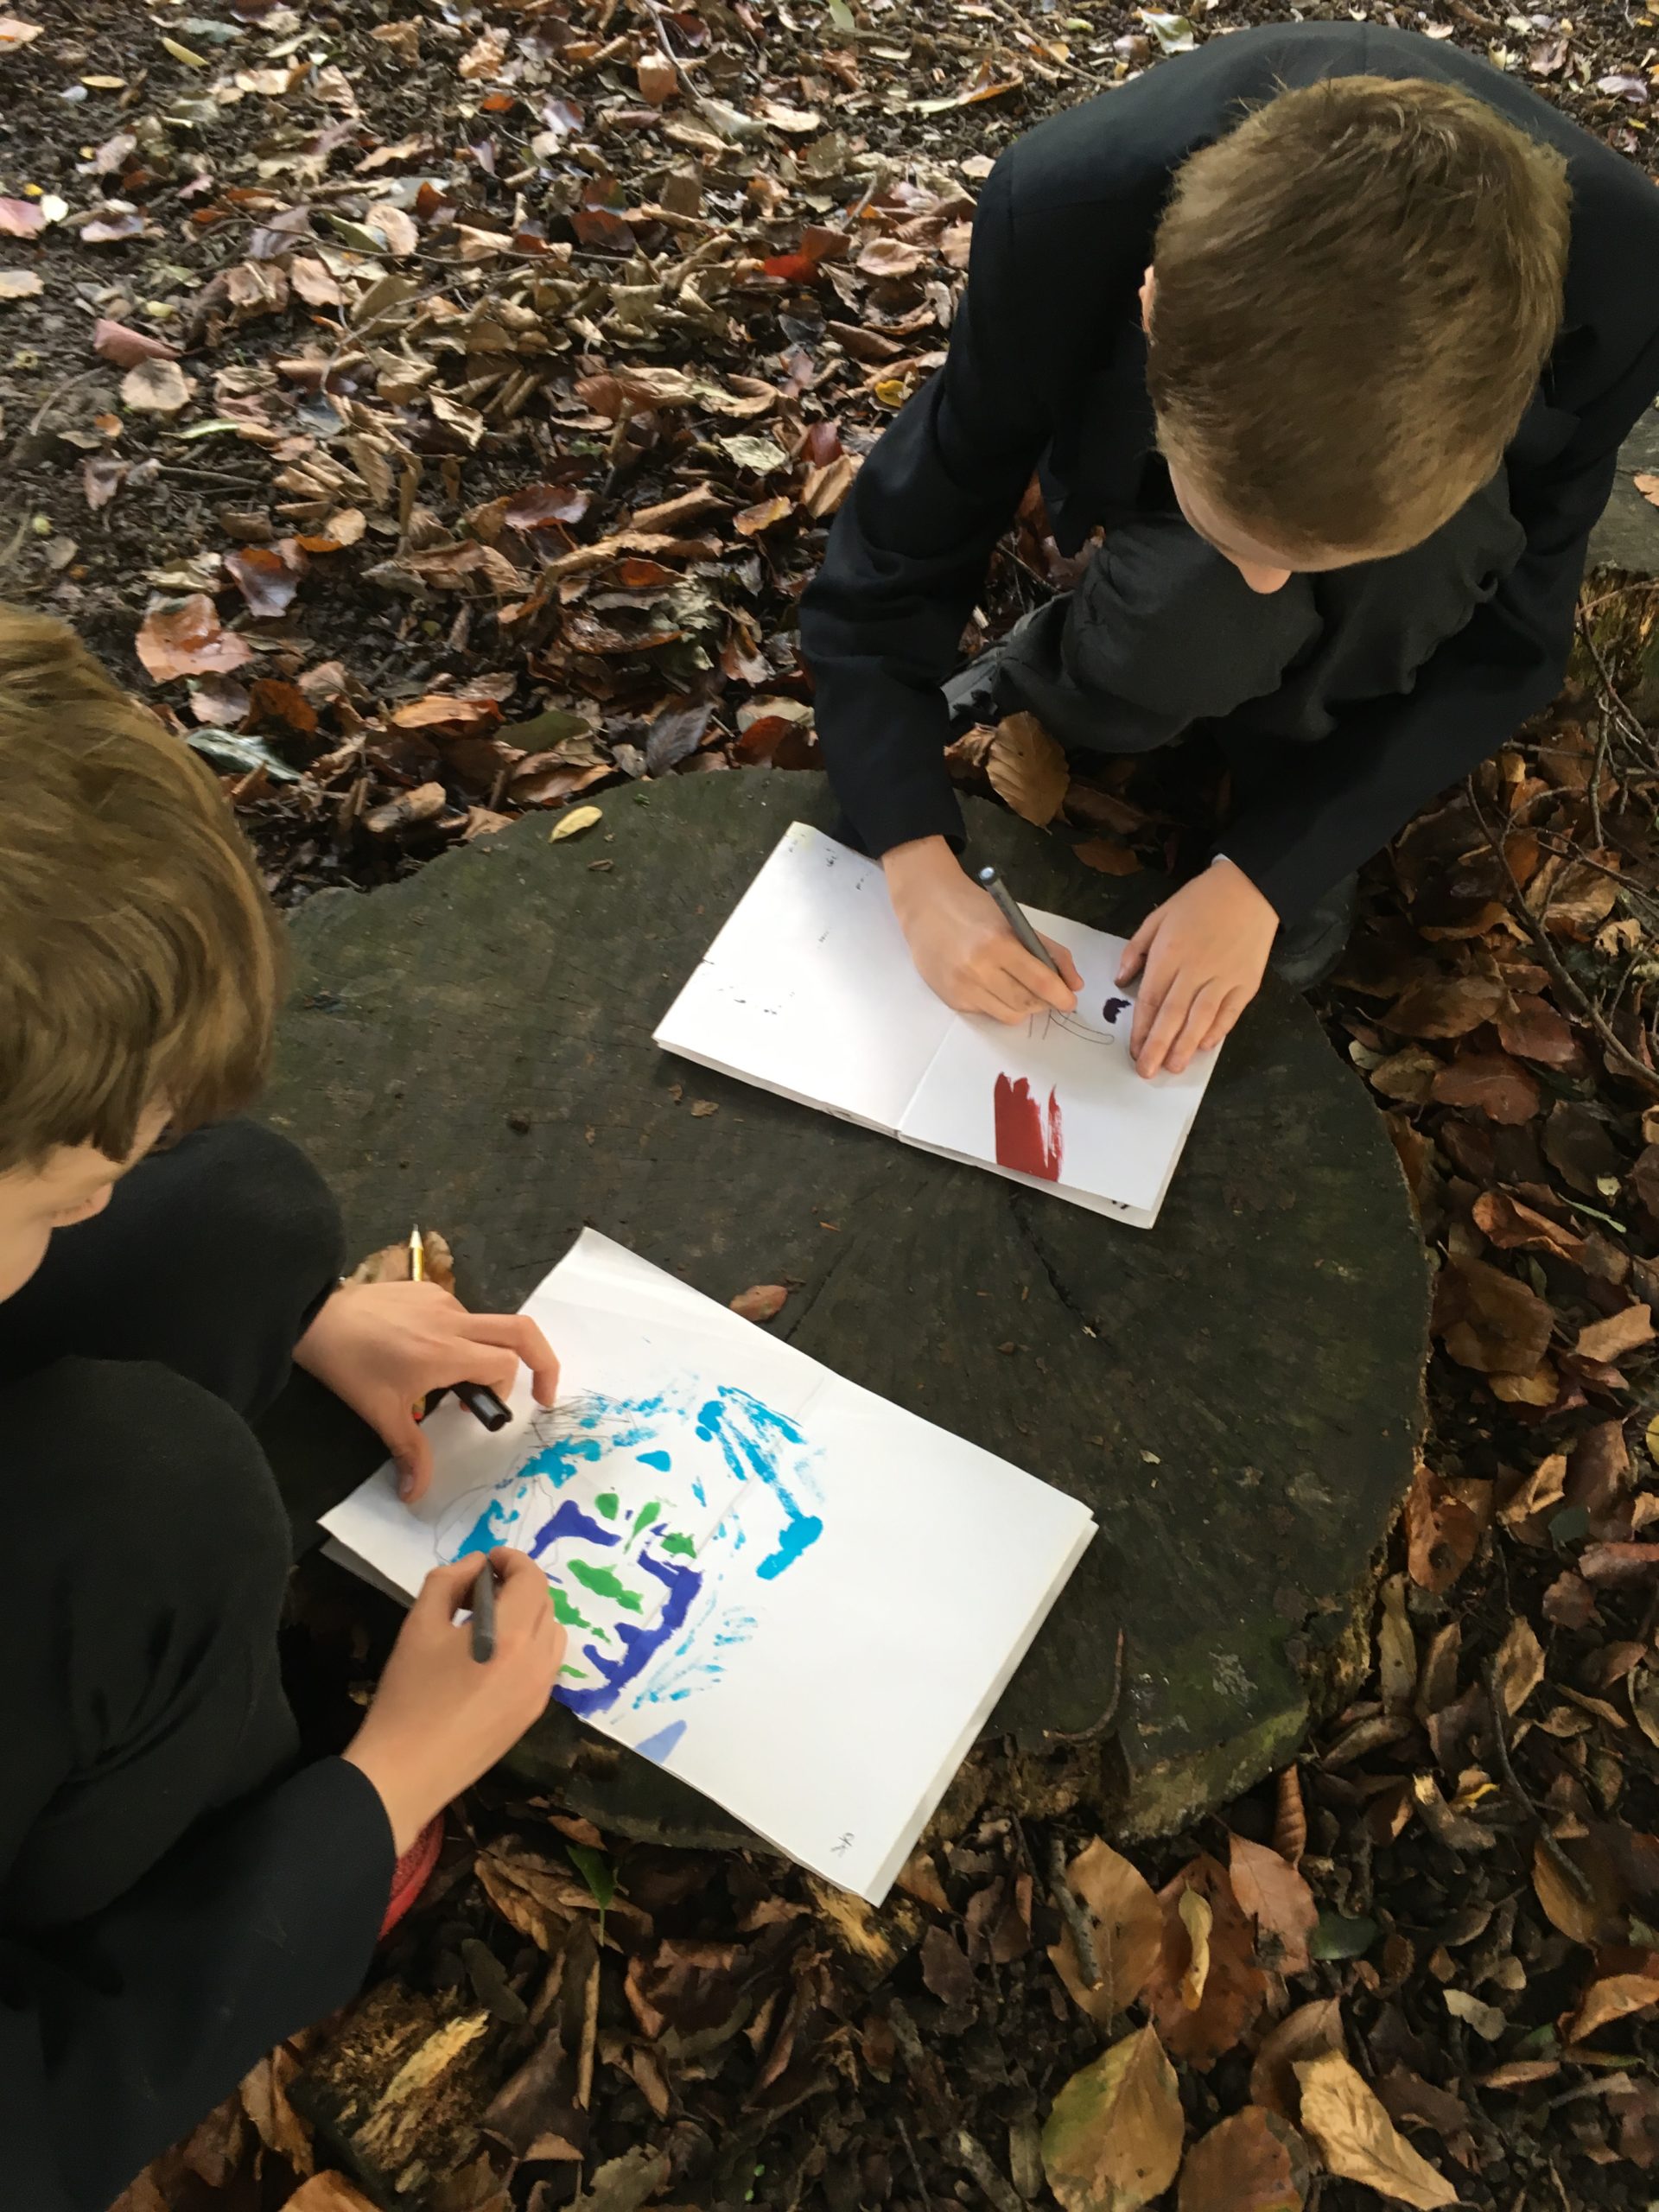 Two boys sketching in books outdoors